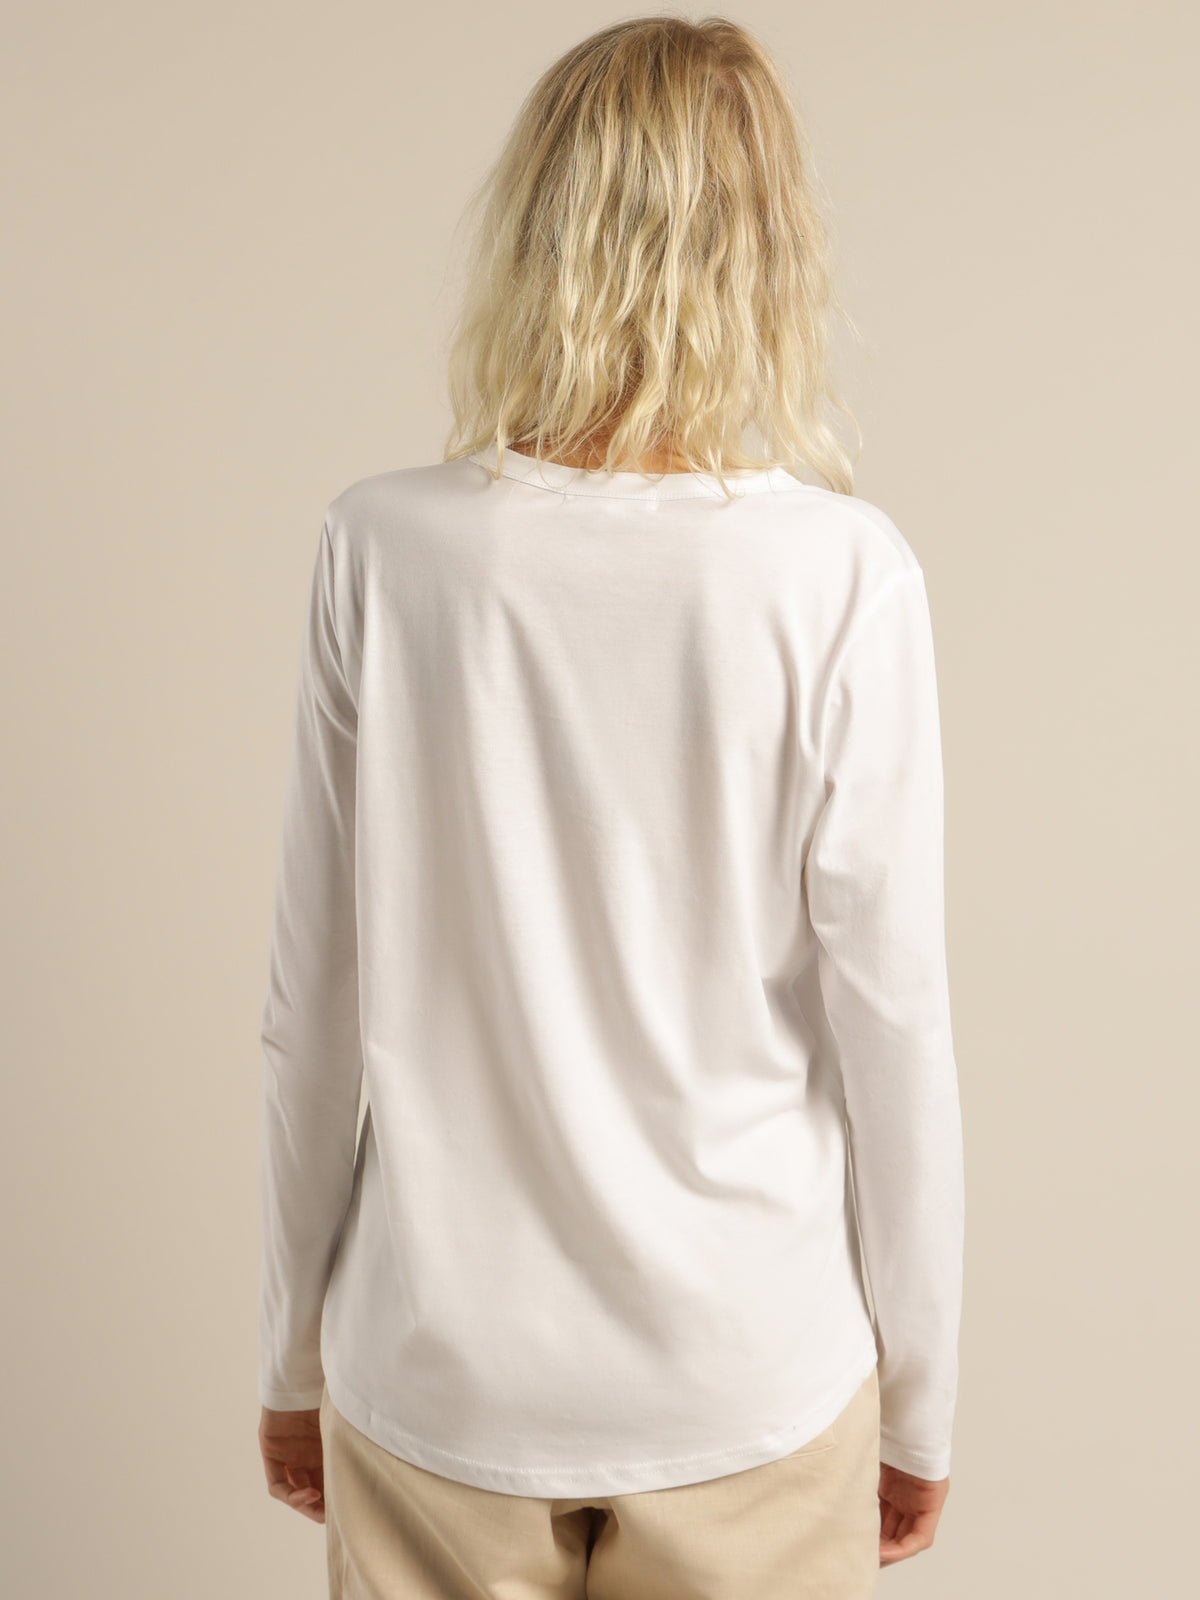 Ava Long Sleeve Top in White